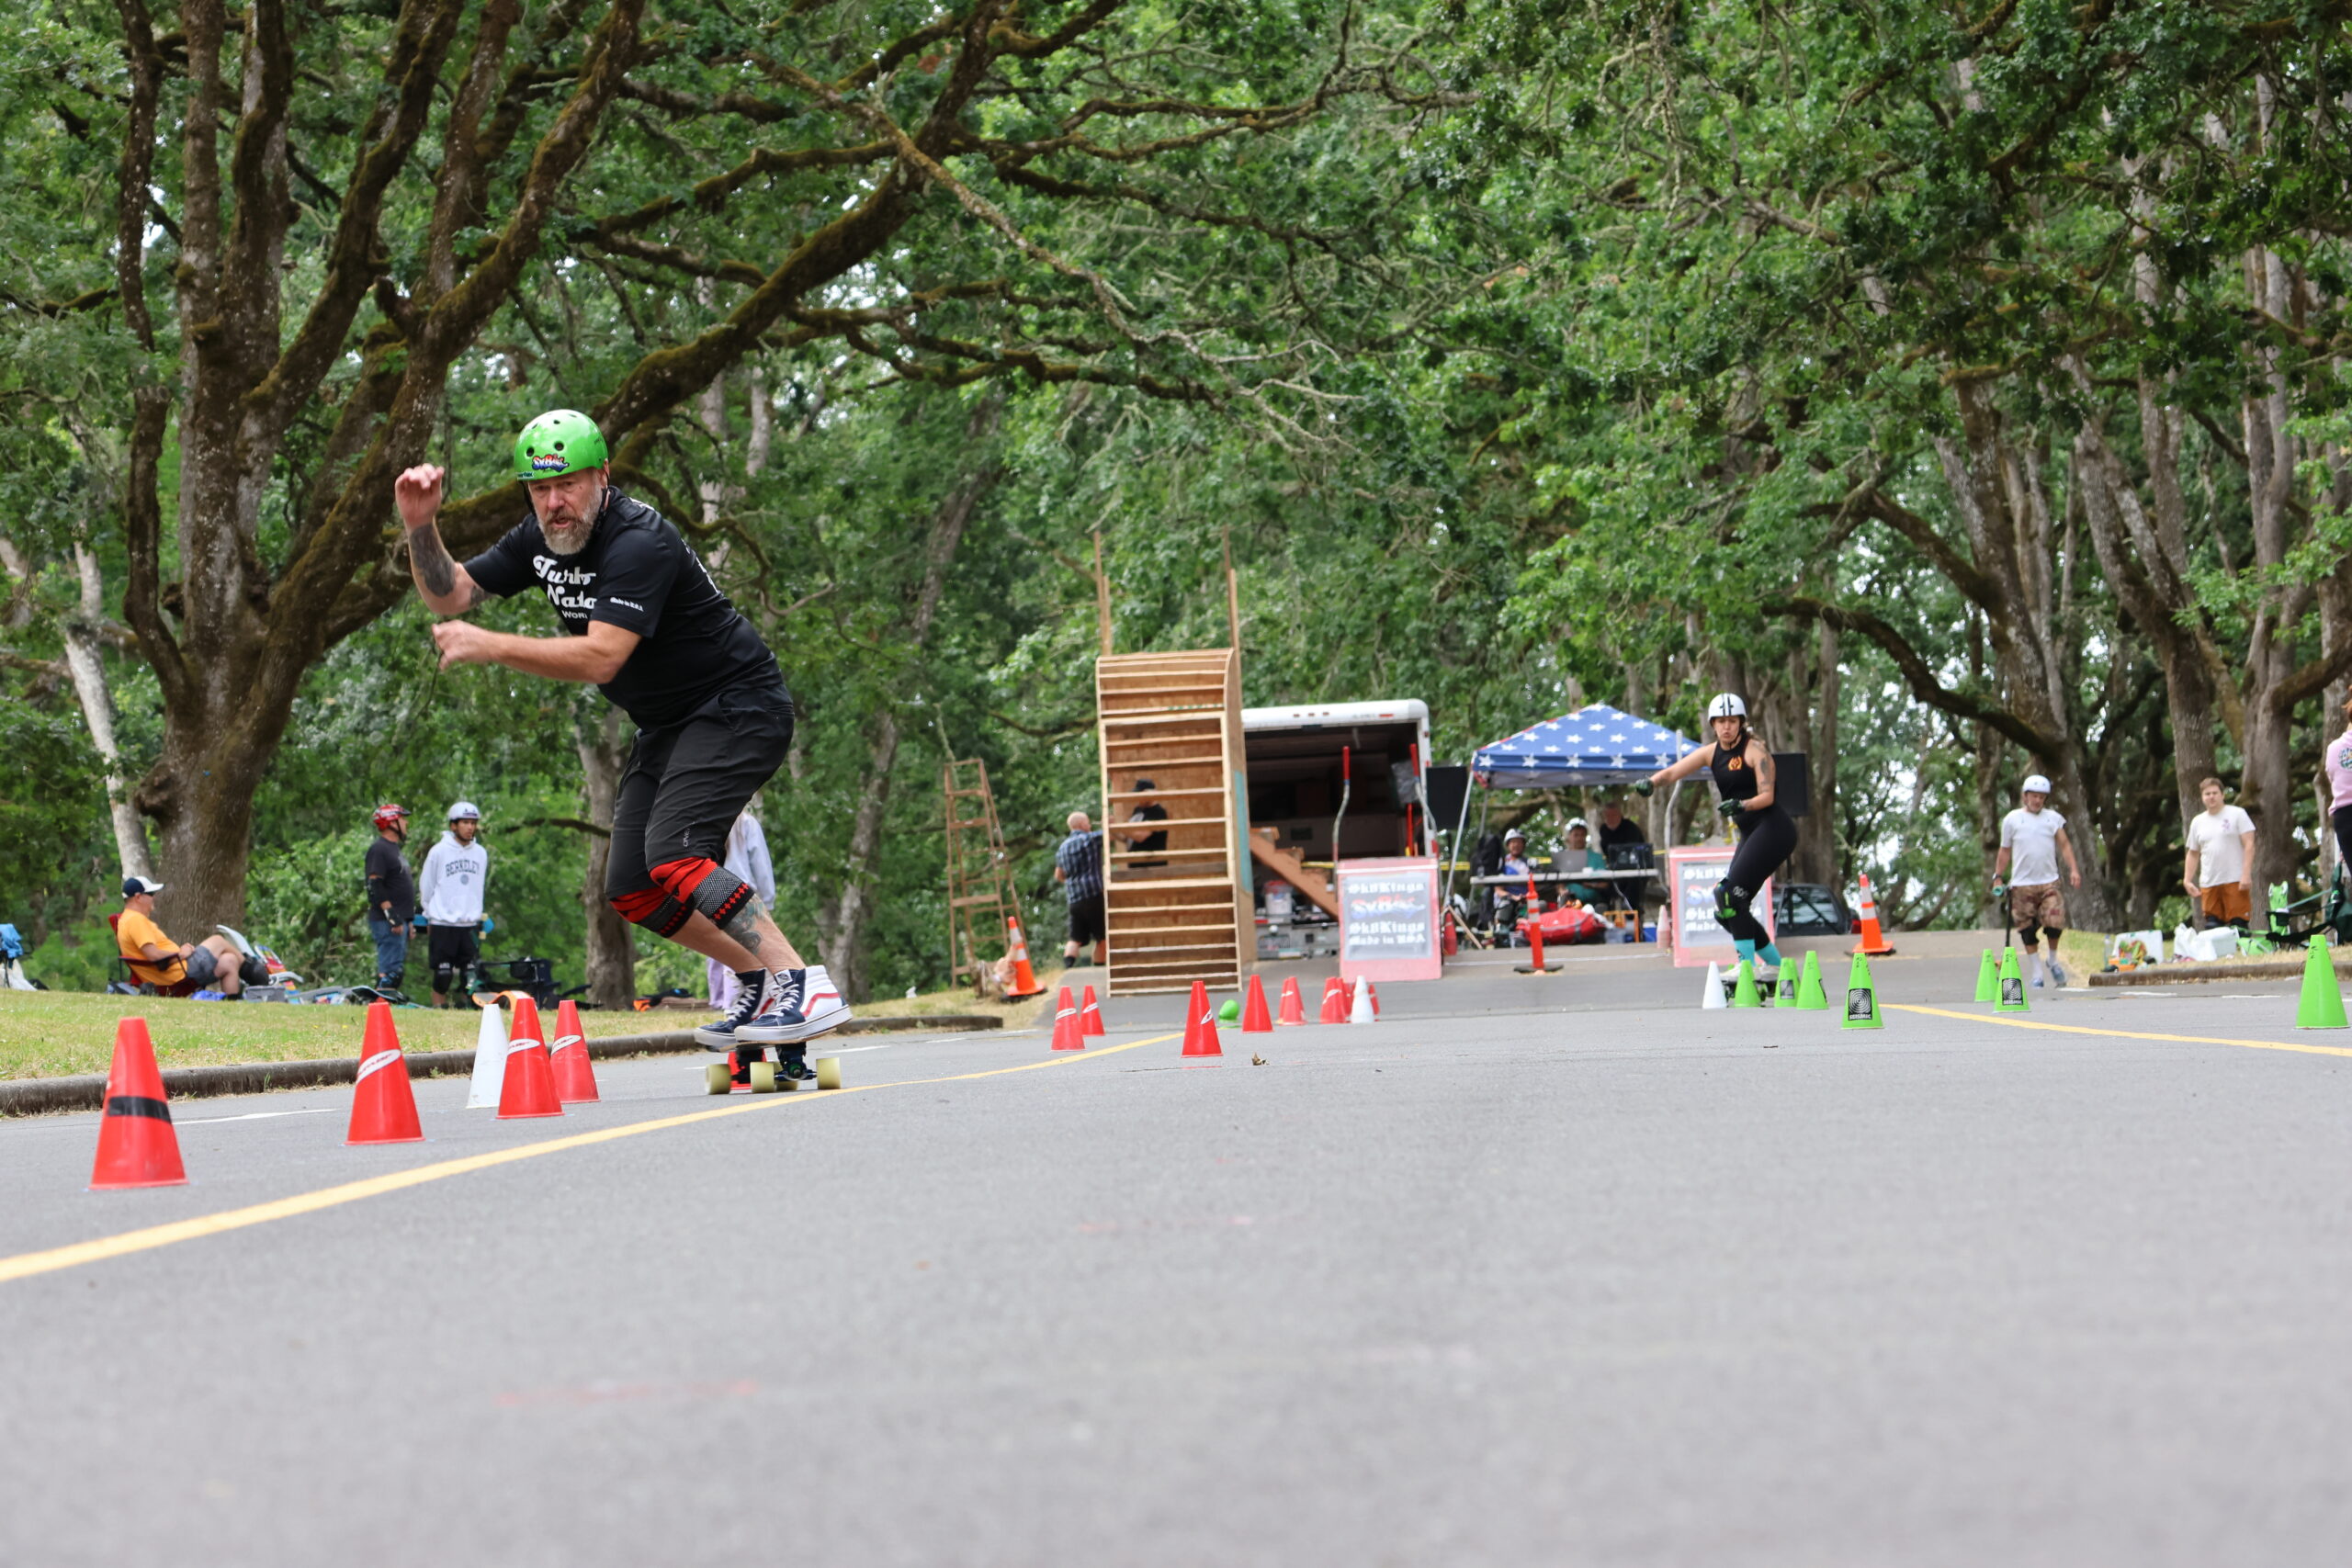 Slalom Skateboarding World Championships Dropping into Salem in Just Two Weeks!